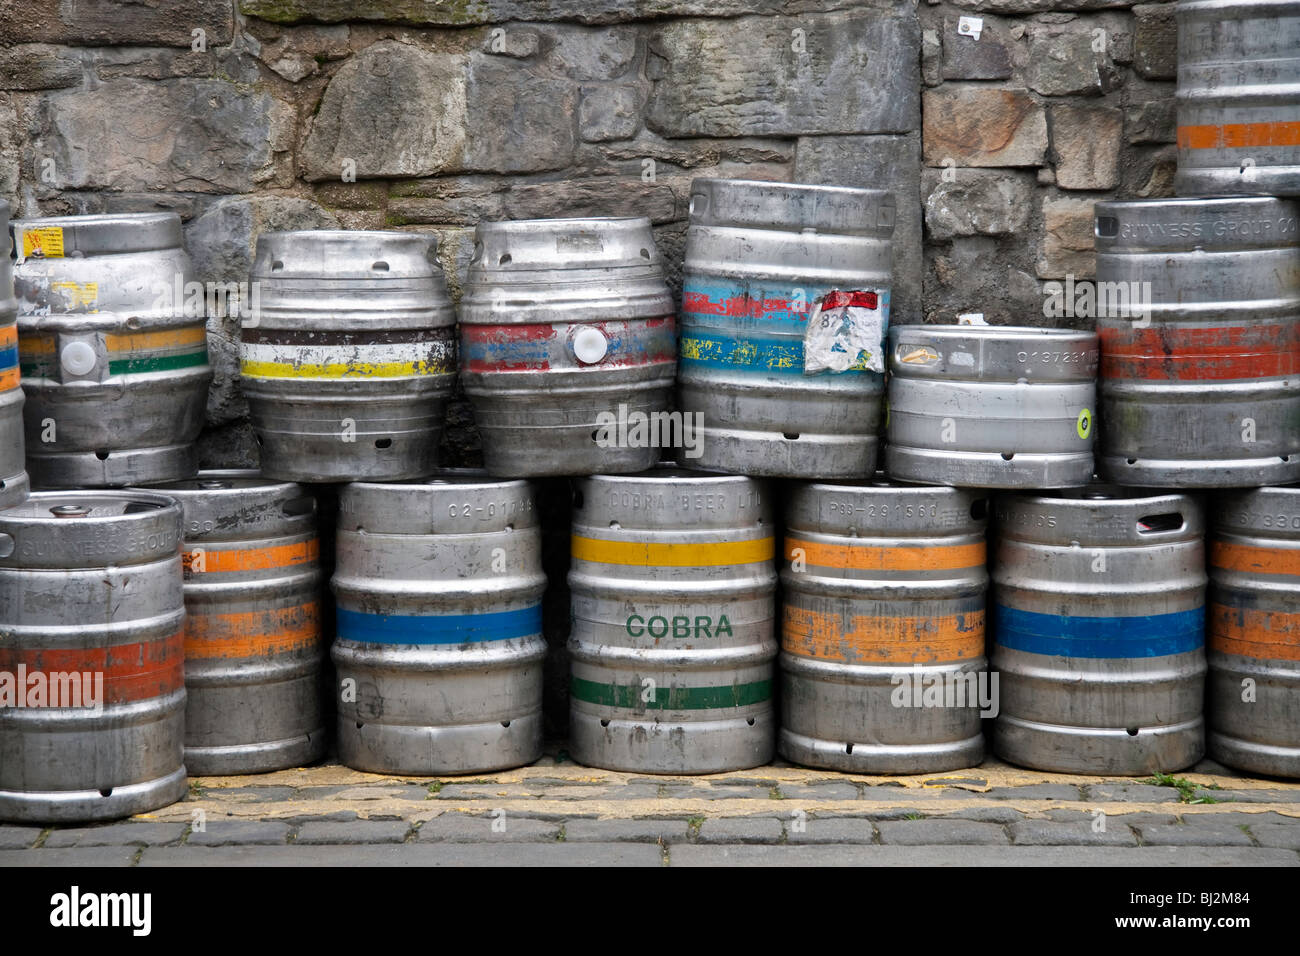 Beer kegs stacked against a stone brick wall on North Thistle Street Lane, Edinburgh Stock Photo